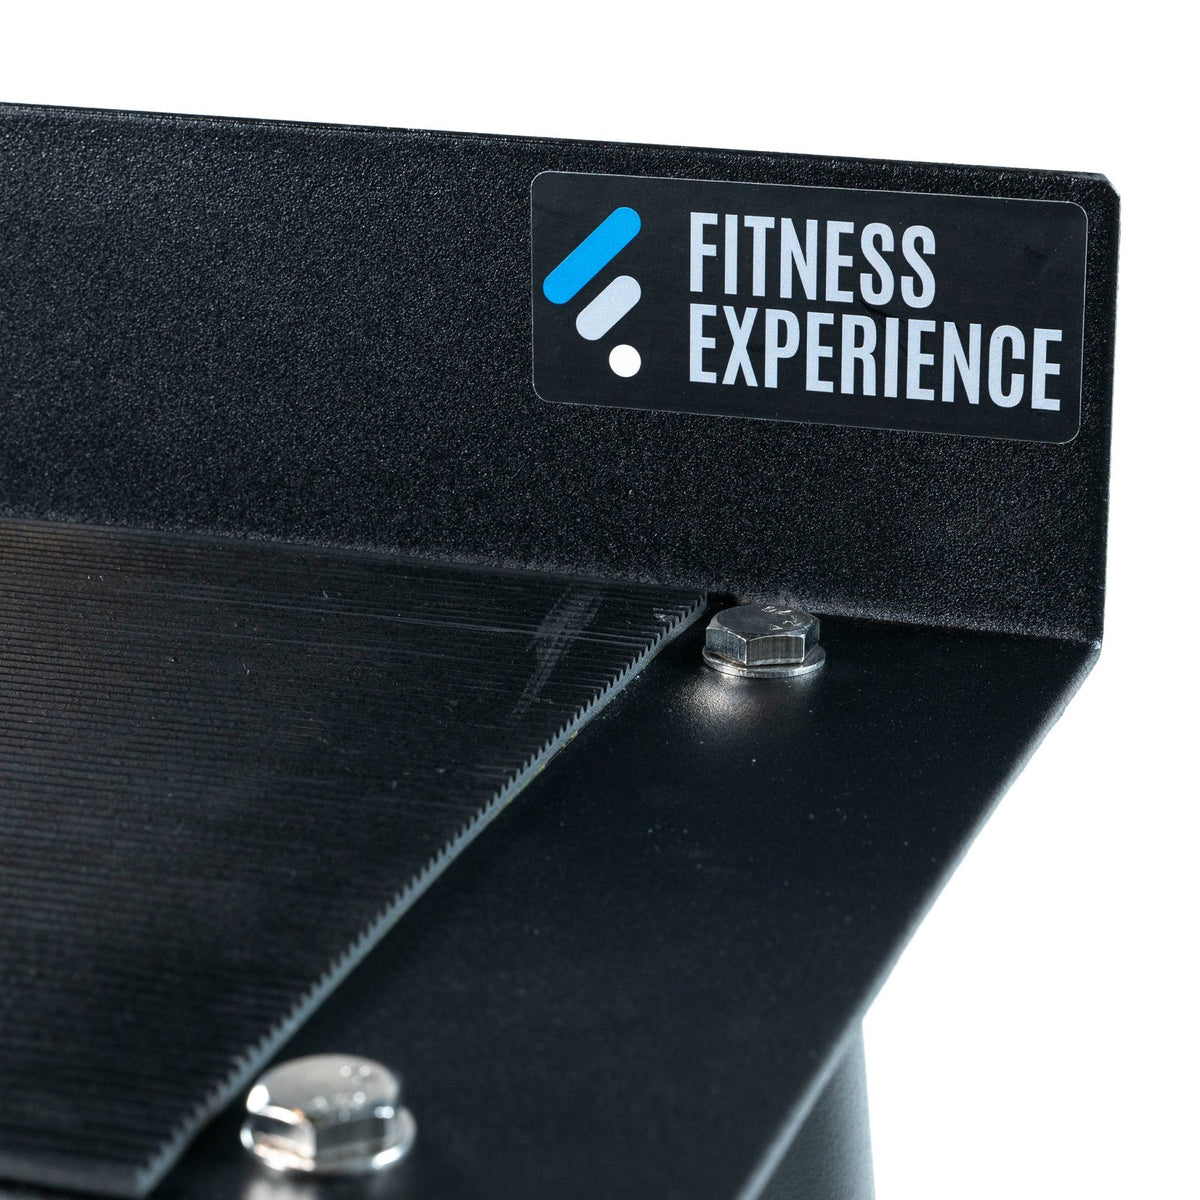 FitWay Equip. Kettlebell Rack - Three Tier - Fitness Experience